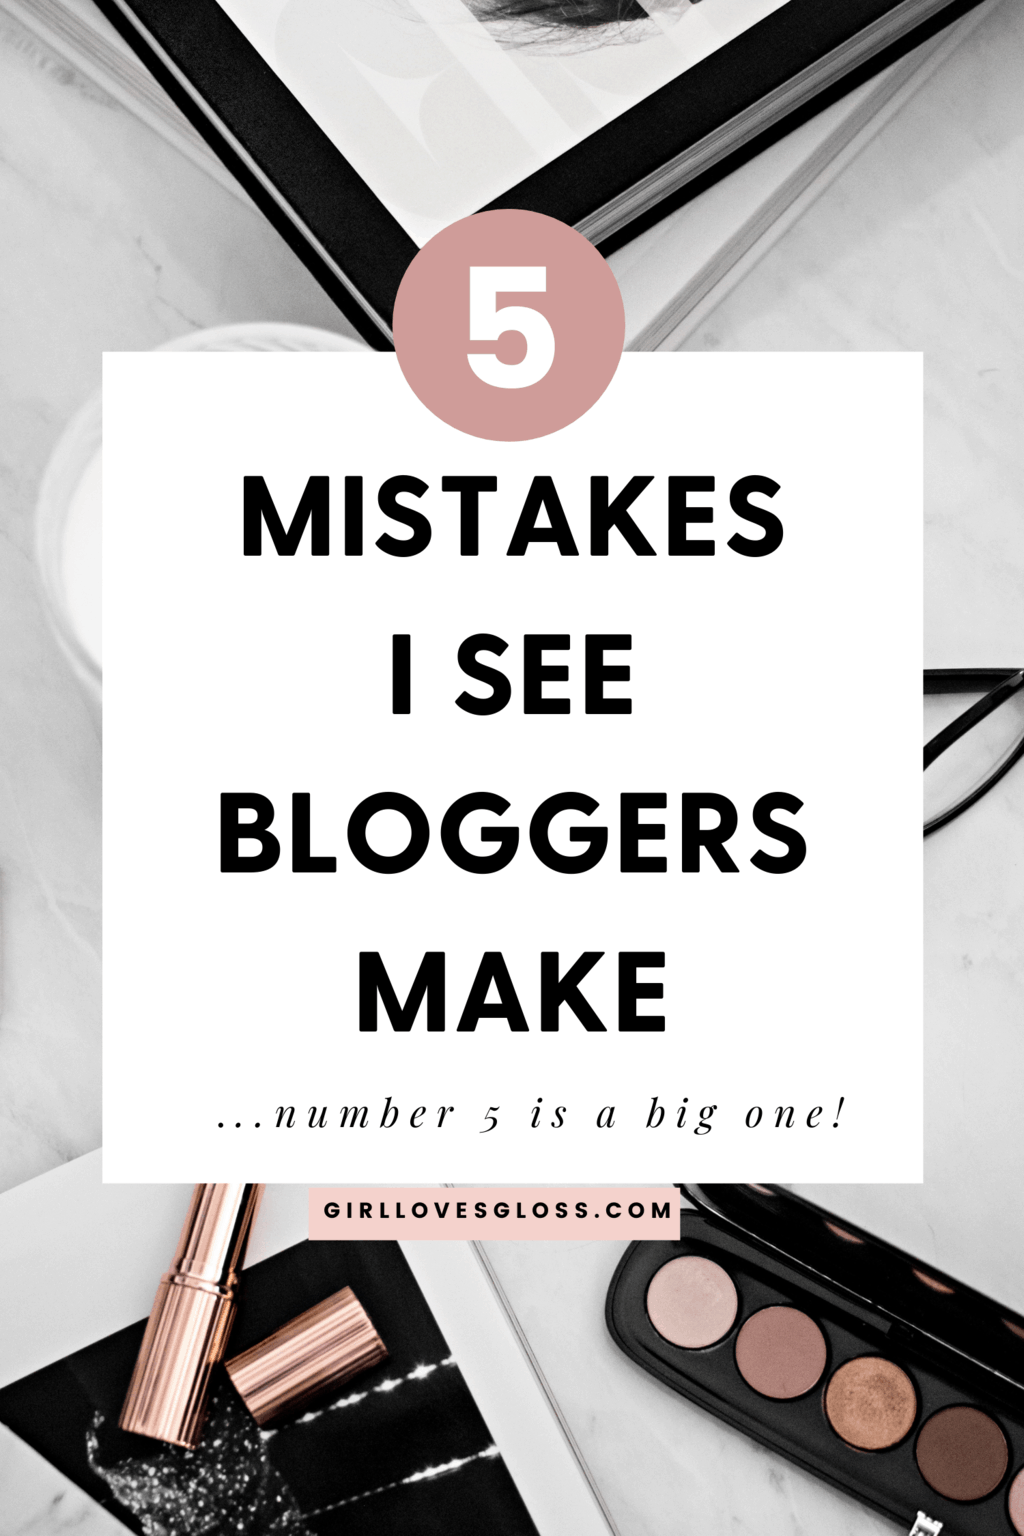 5 Mistakes Bloggers Make and How to Fix Them